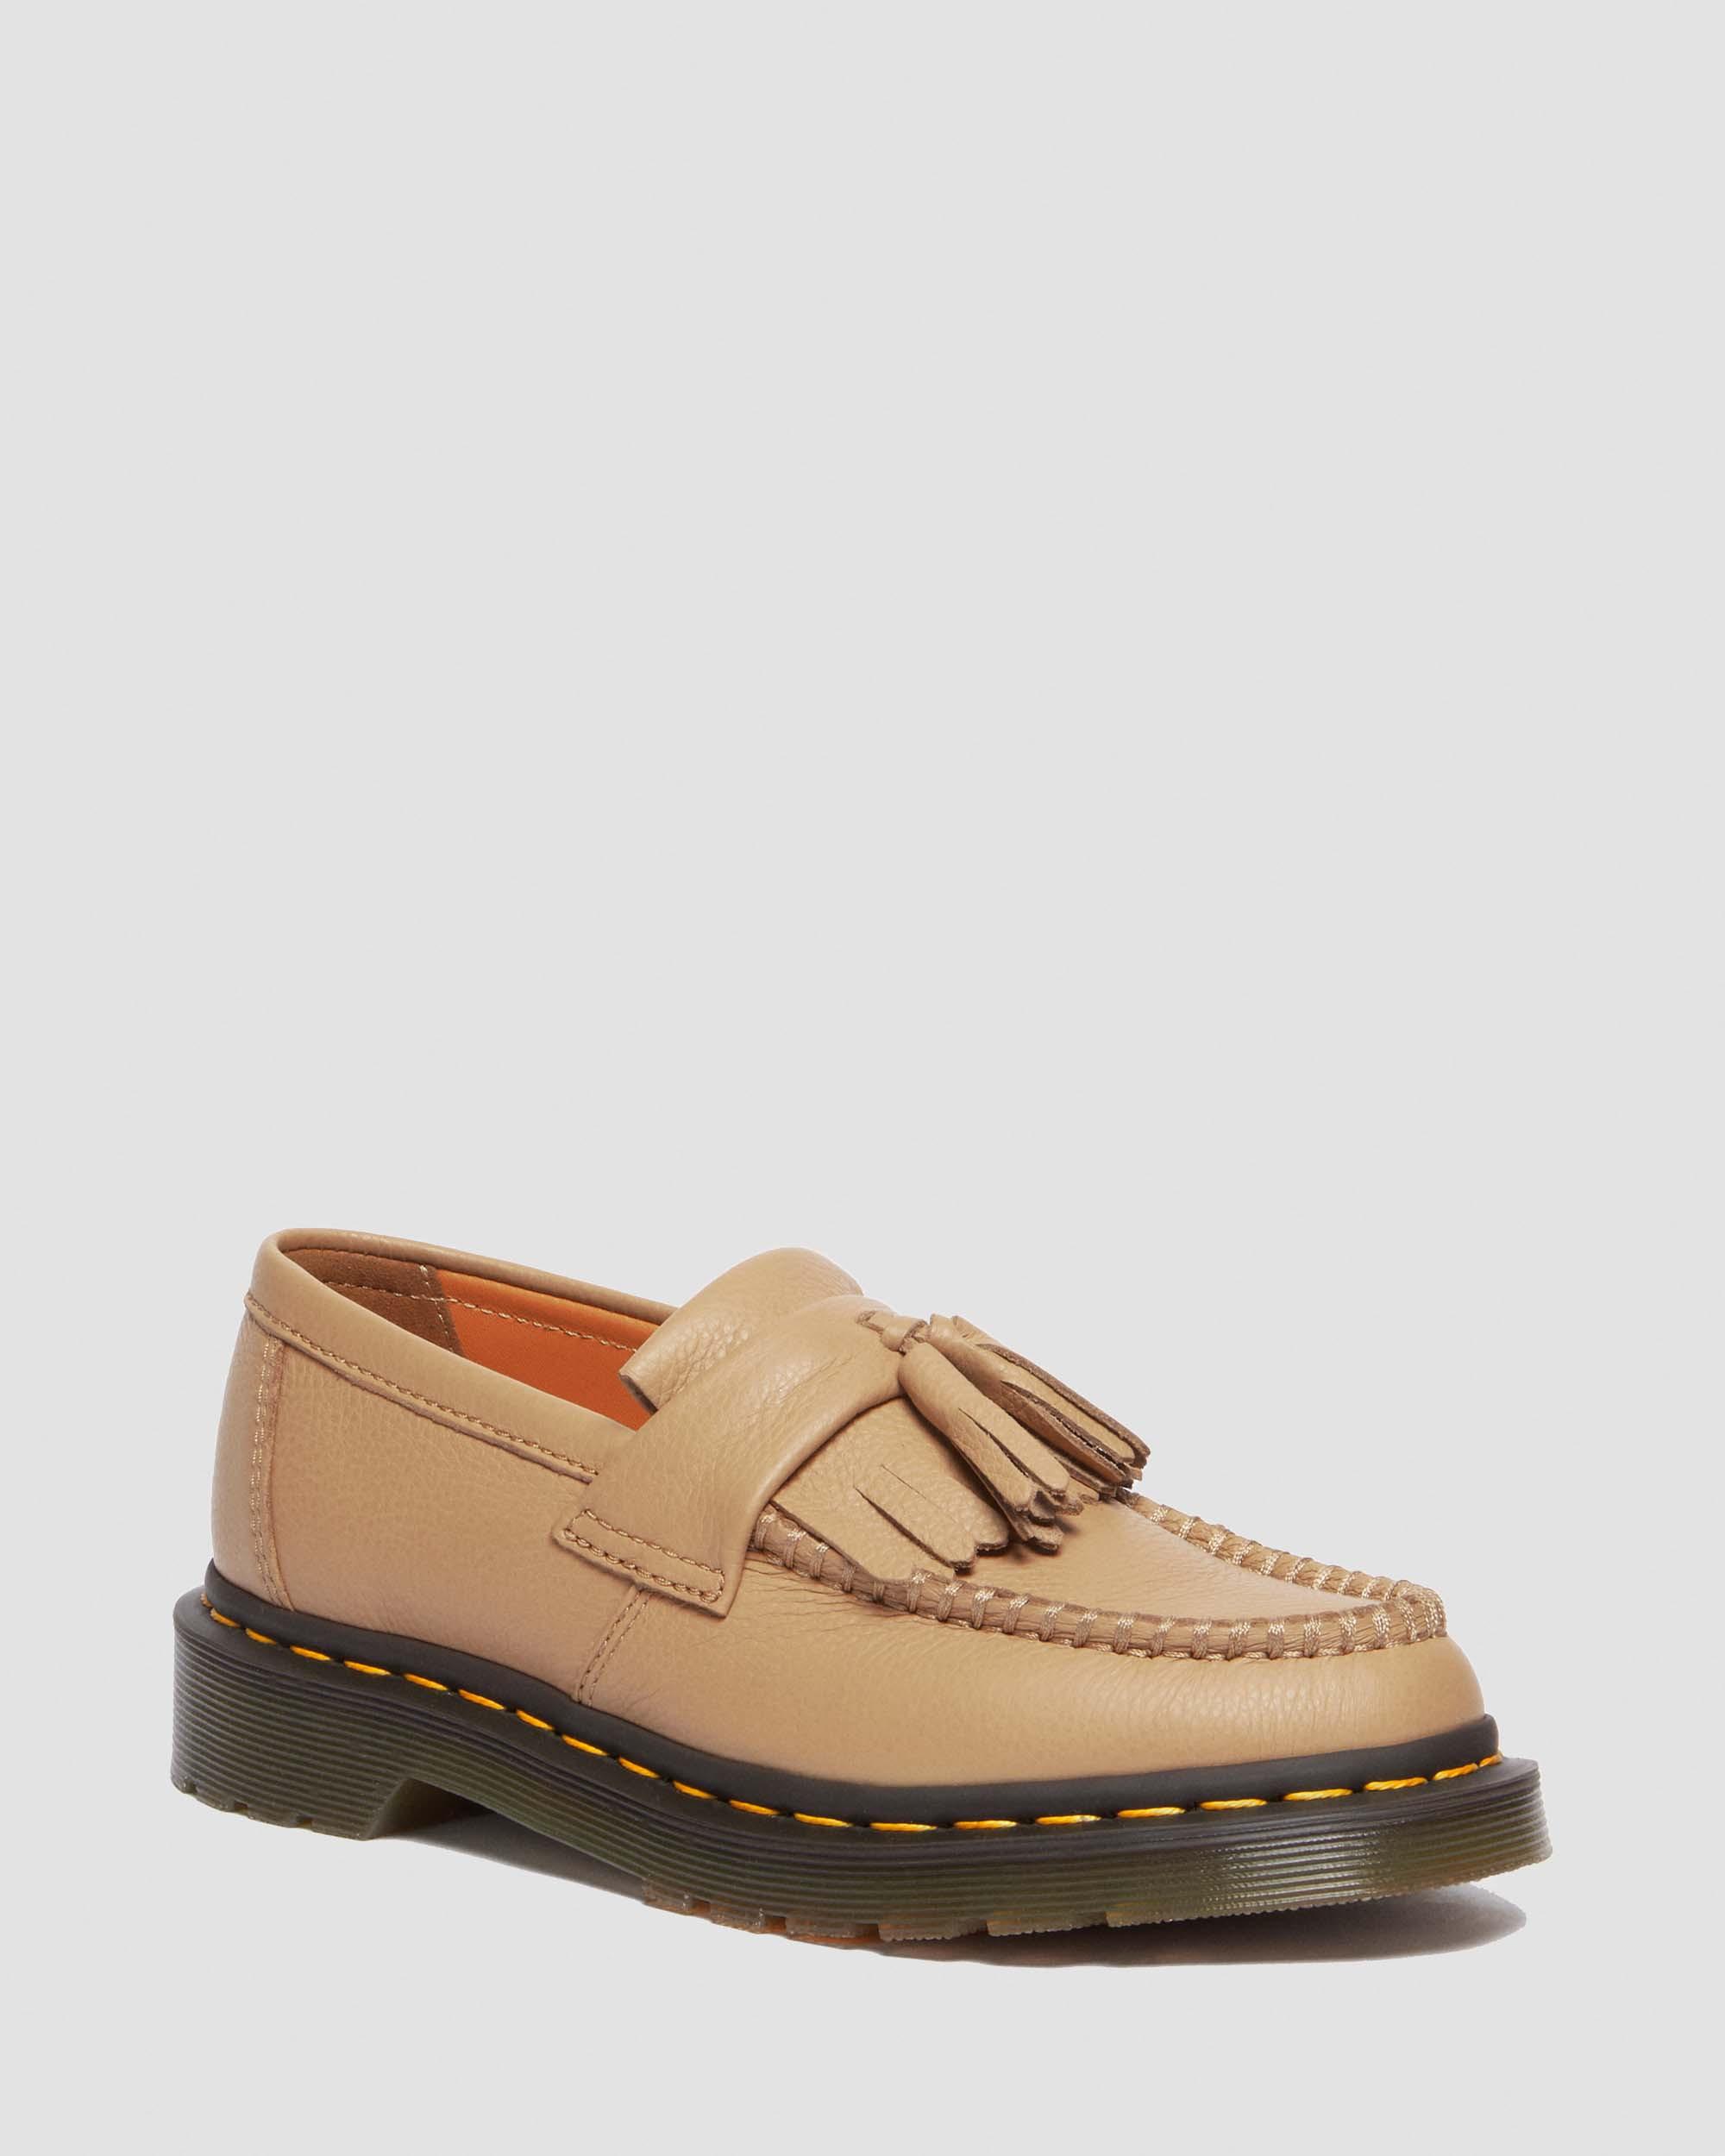 Adrian Virginia Leather Tassel Loafers, Muted Olive | Dr. Martens